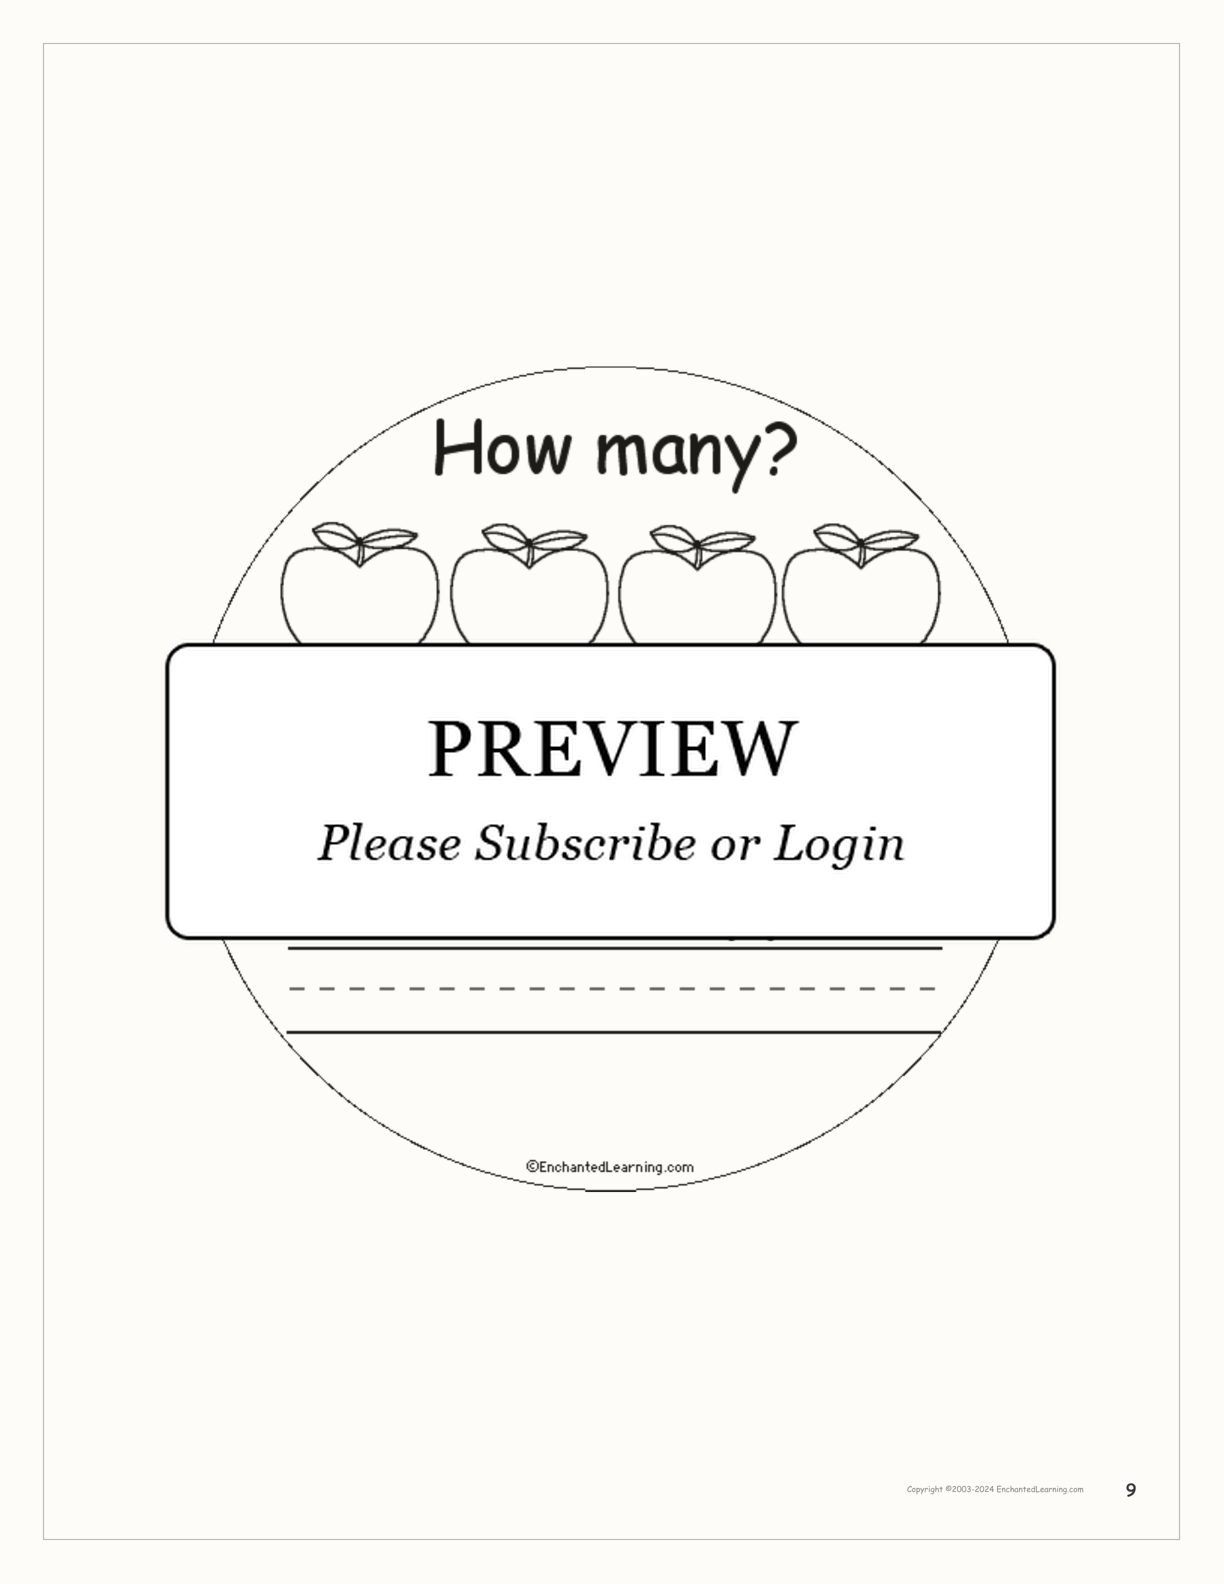 How Many Apples? interactive printout page 9